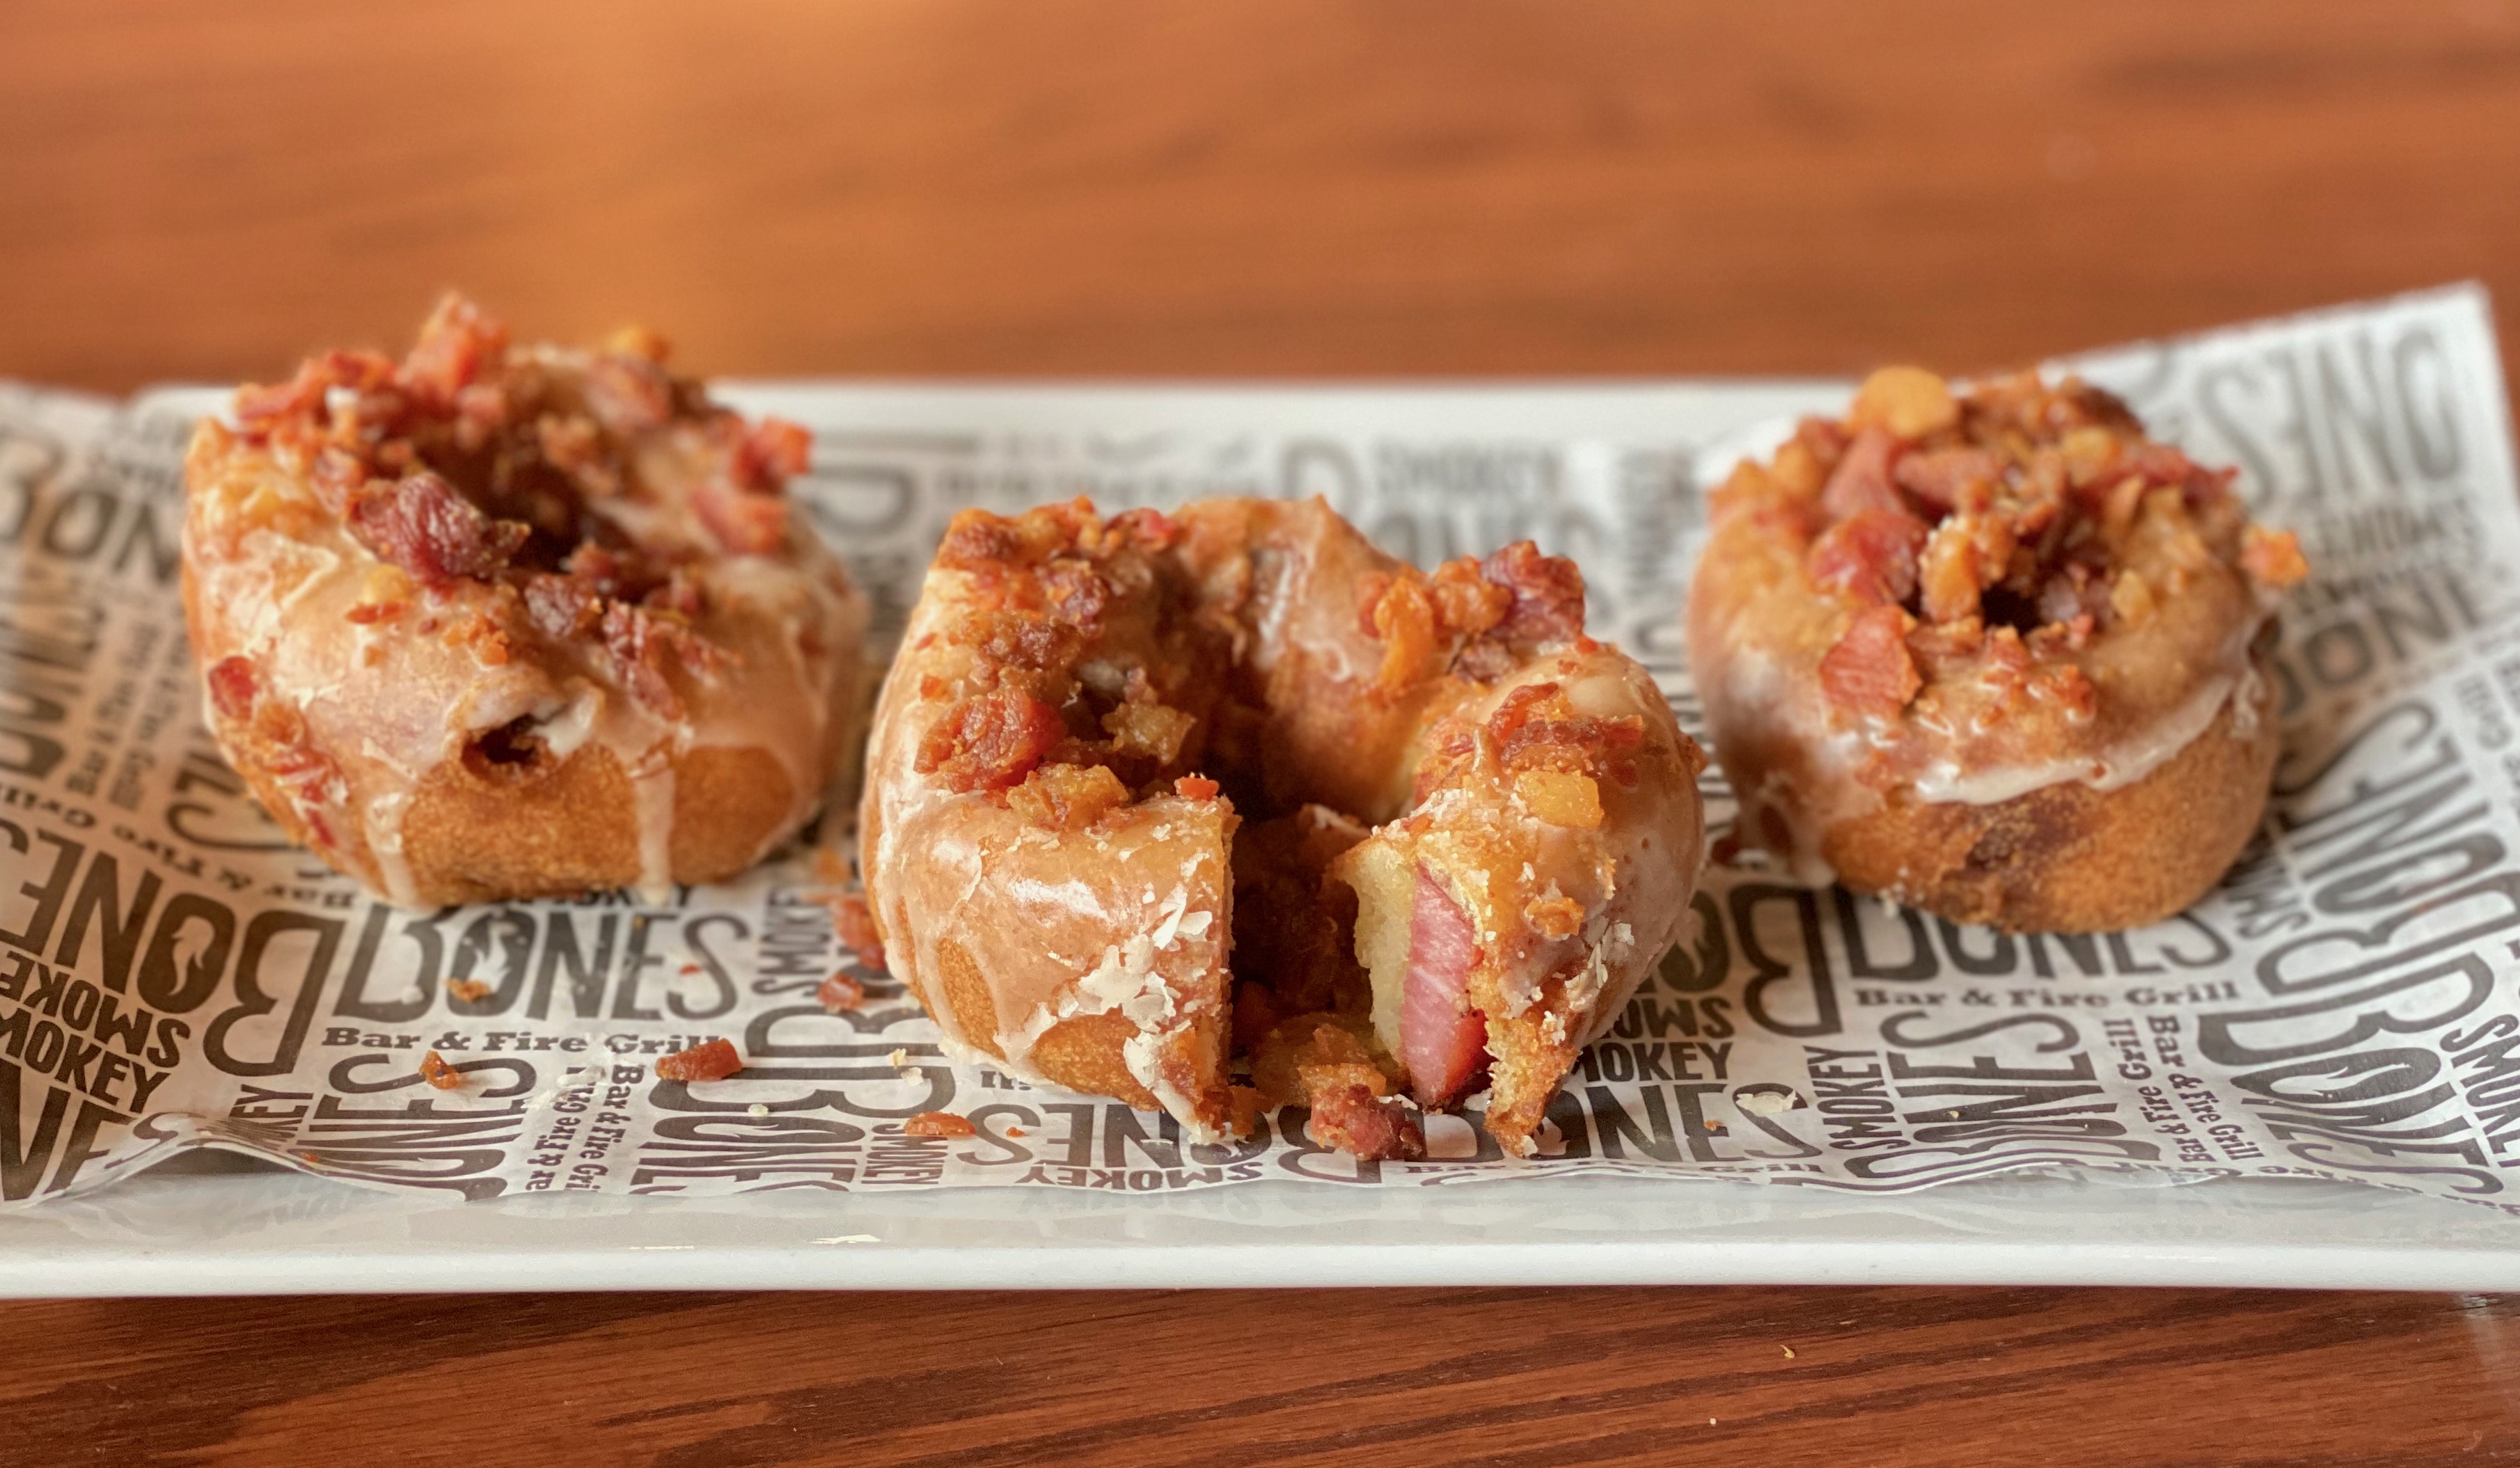 Smokey Bones Bacon Donut for sale June 5, 2020 ONLY